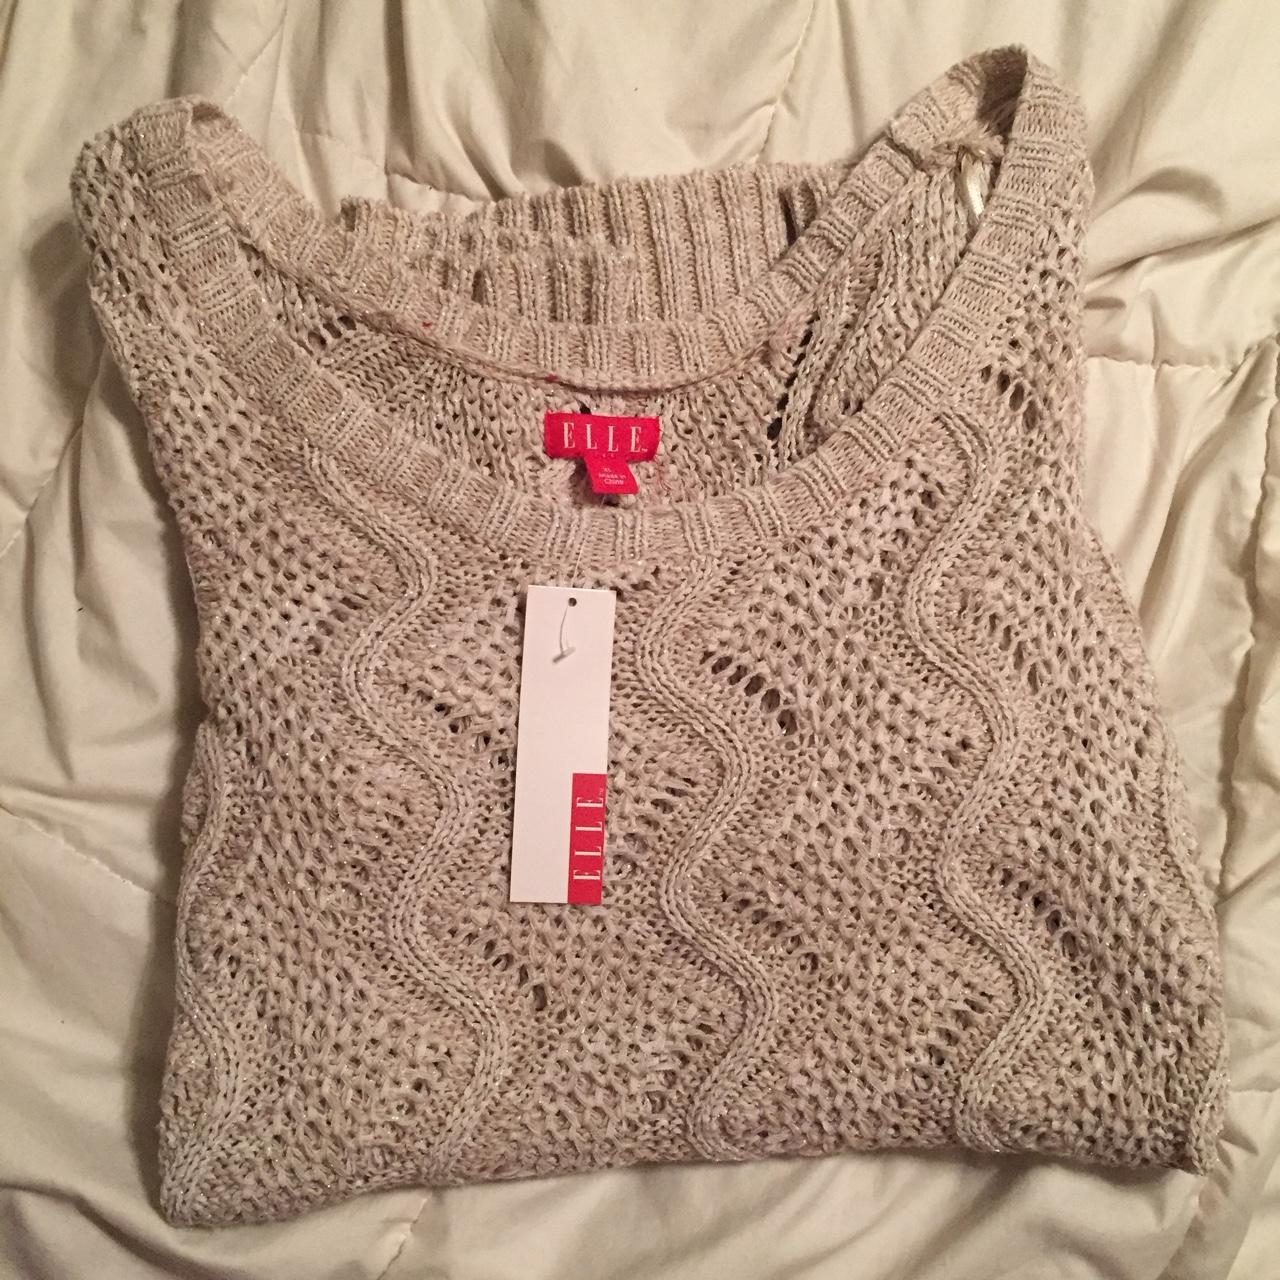 ELLE Women's Grey and Silver Jumper